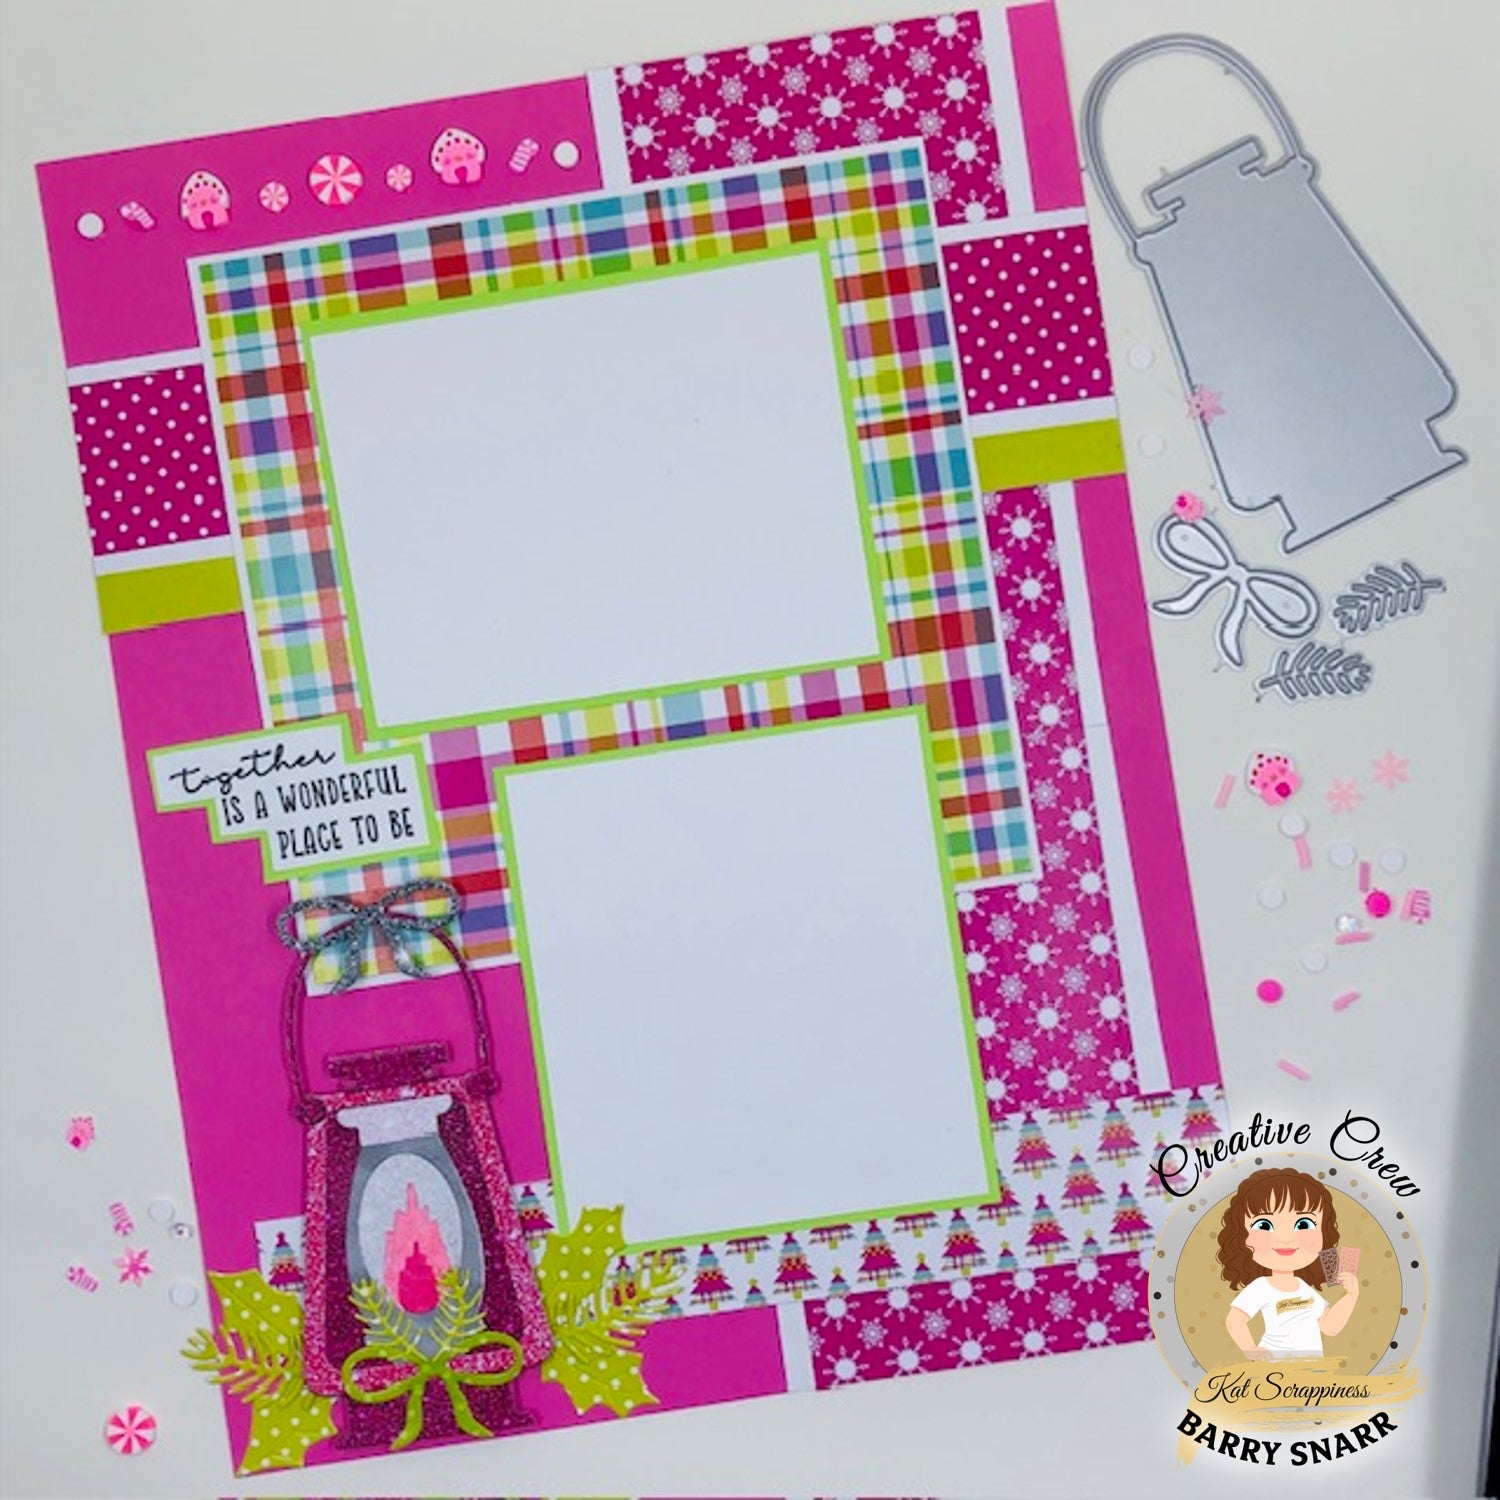 Bright Christmas 2 - 6x6 Paper Pad - New Release